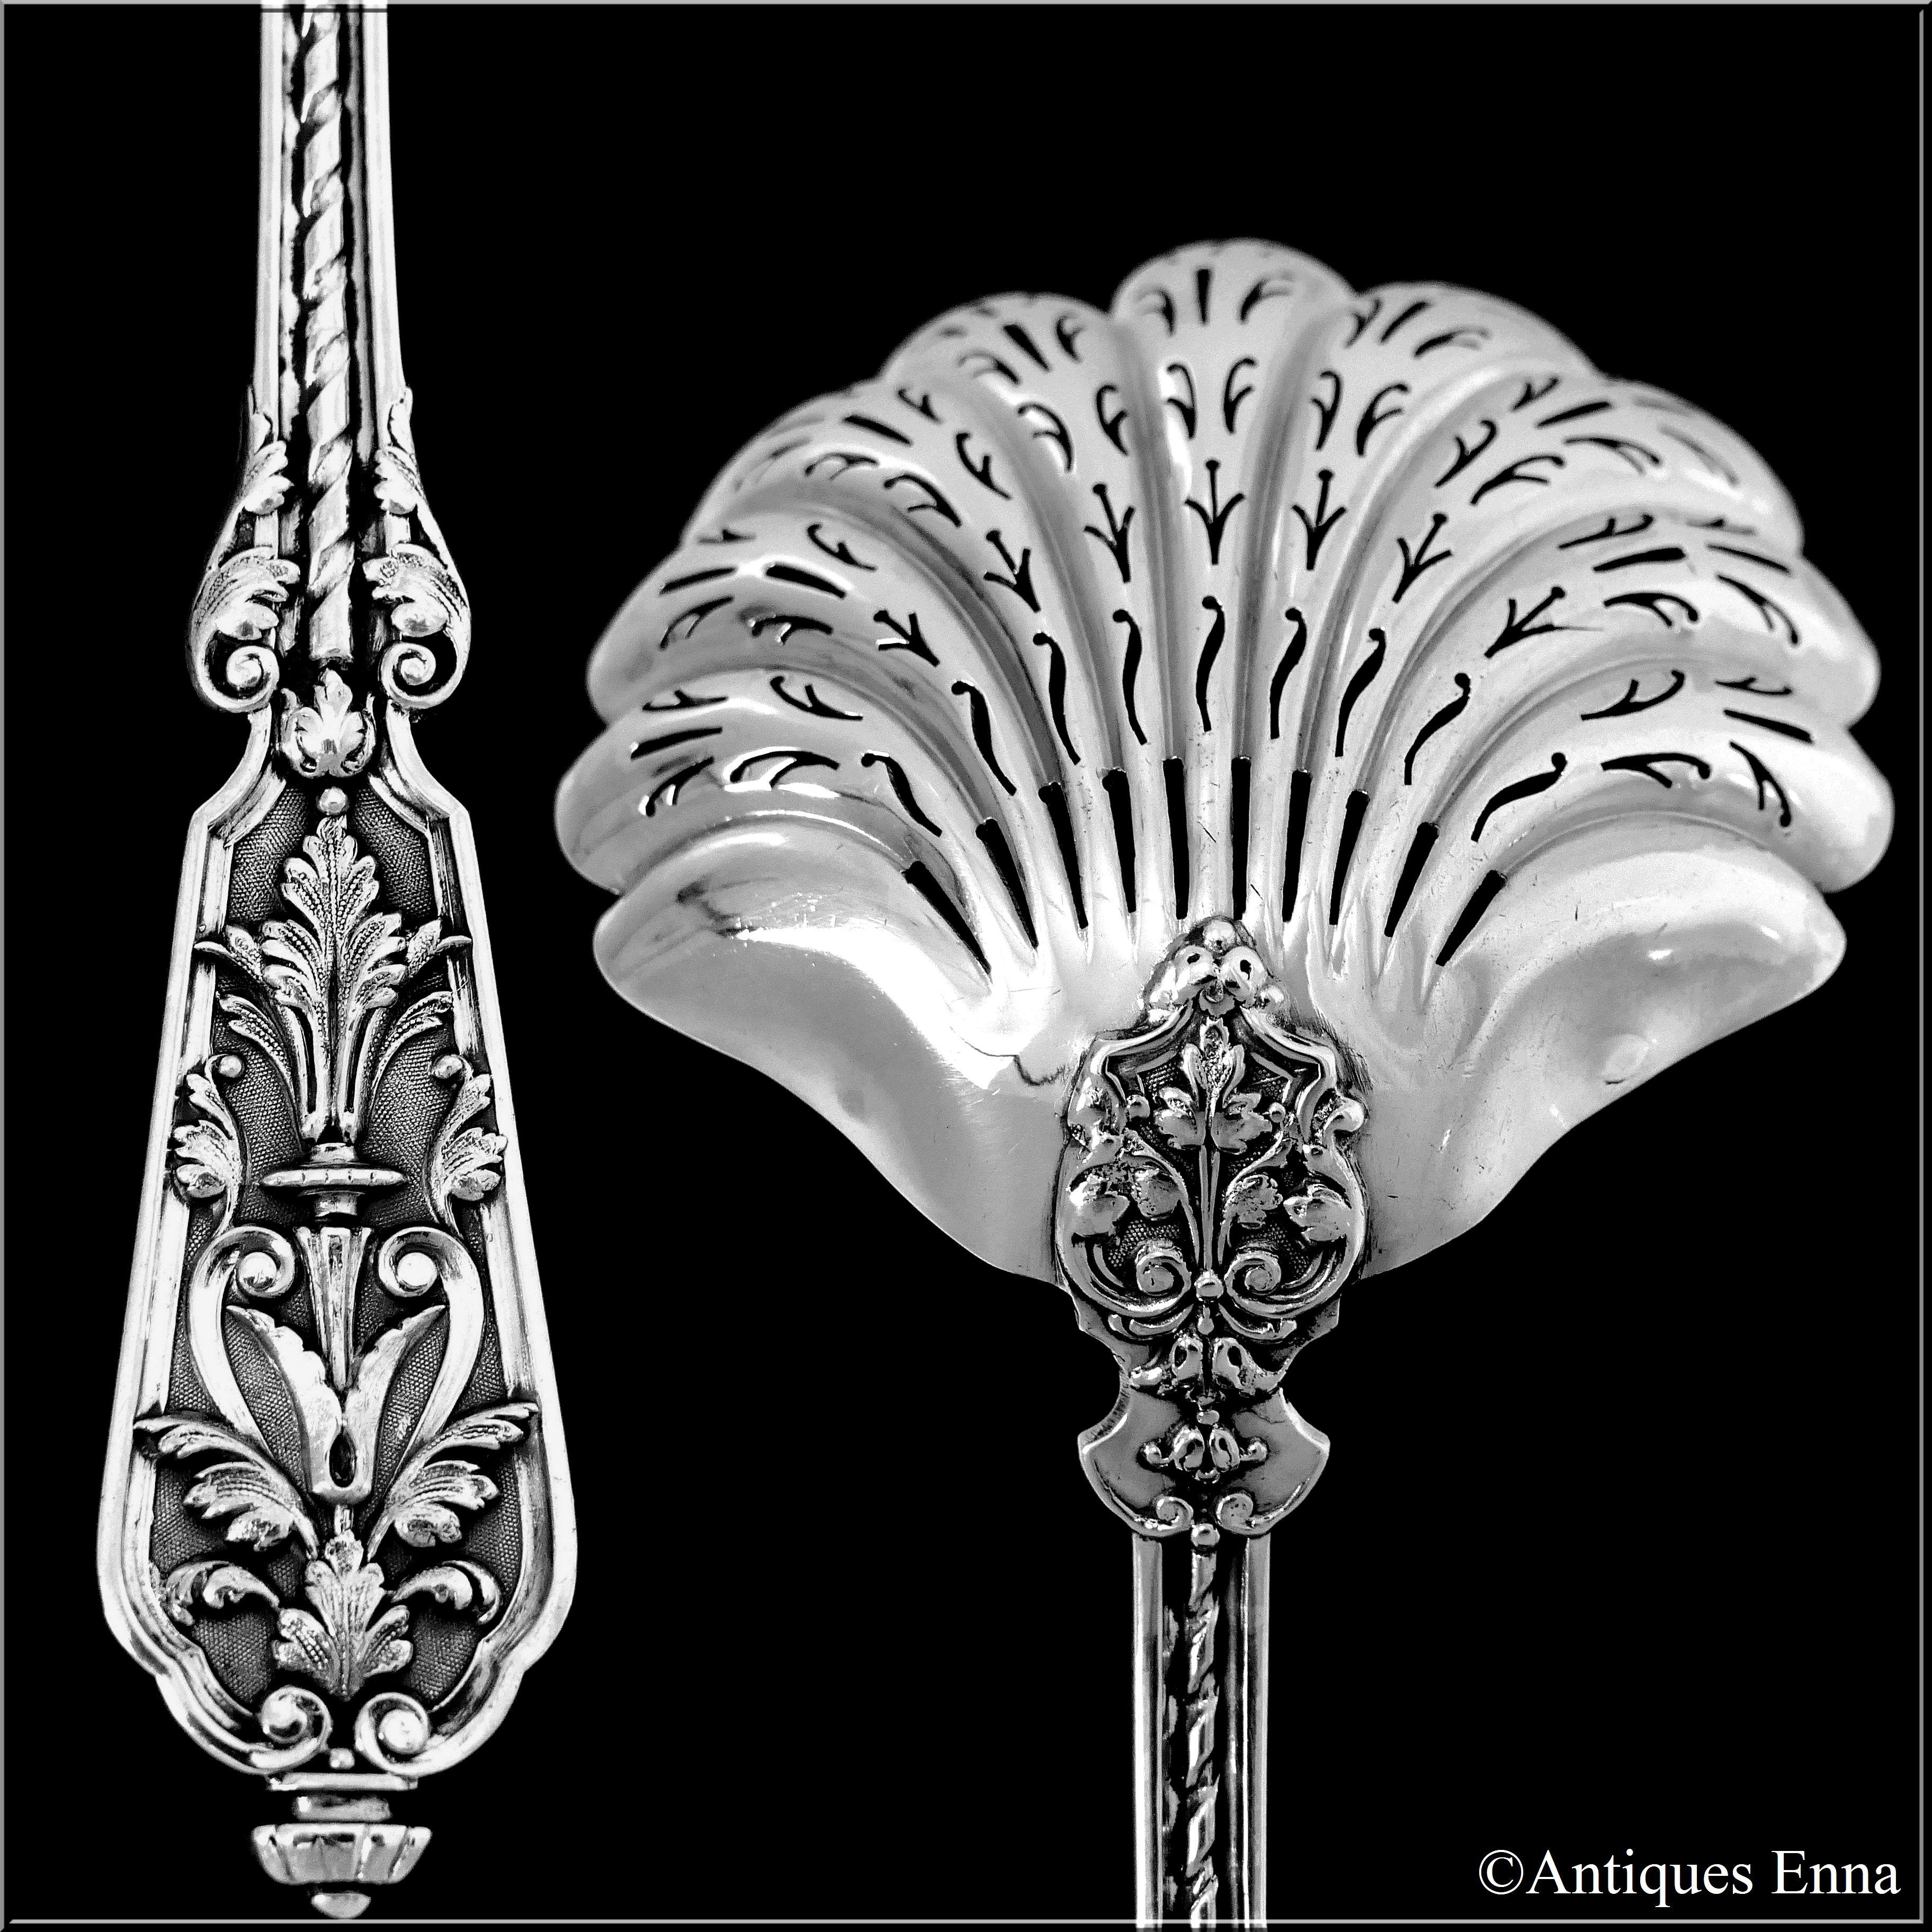 Boar's Head for 800/1000 French sterling silver guarantee.

Extremely rare model by Puiforcat for this sugar sifter spoon with stylized scallop shell bowl. The stem and pierced handle have foliage decoration in the Renaissance style on stippled